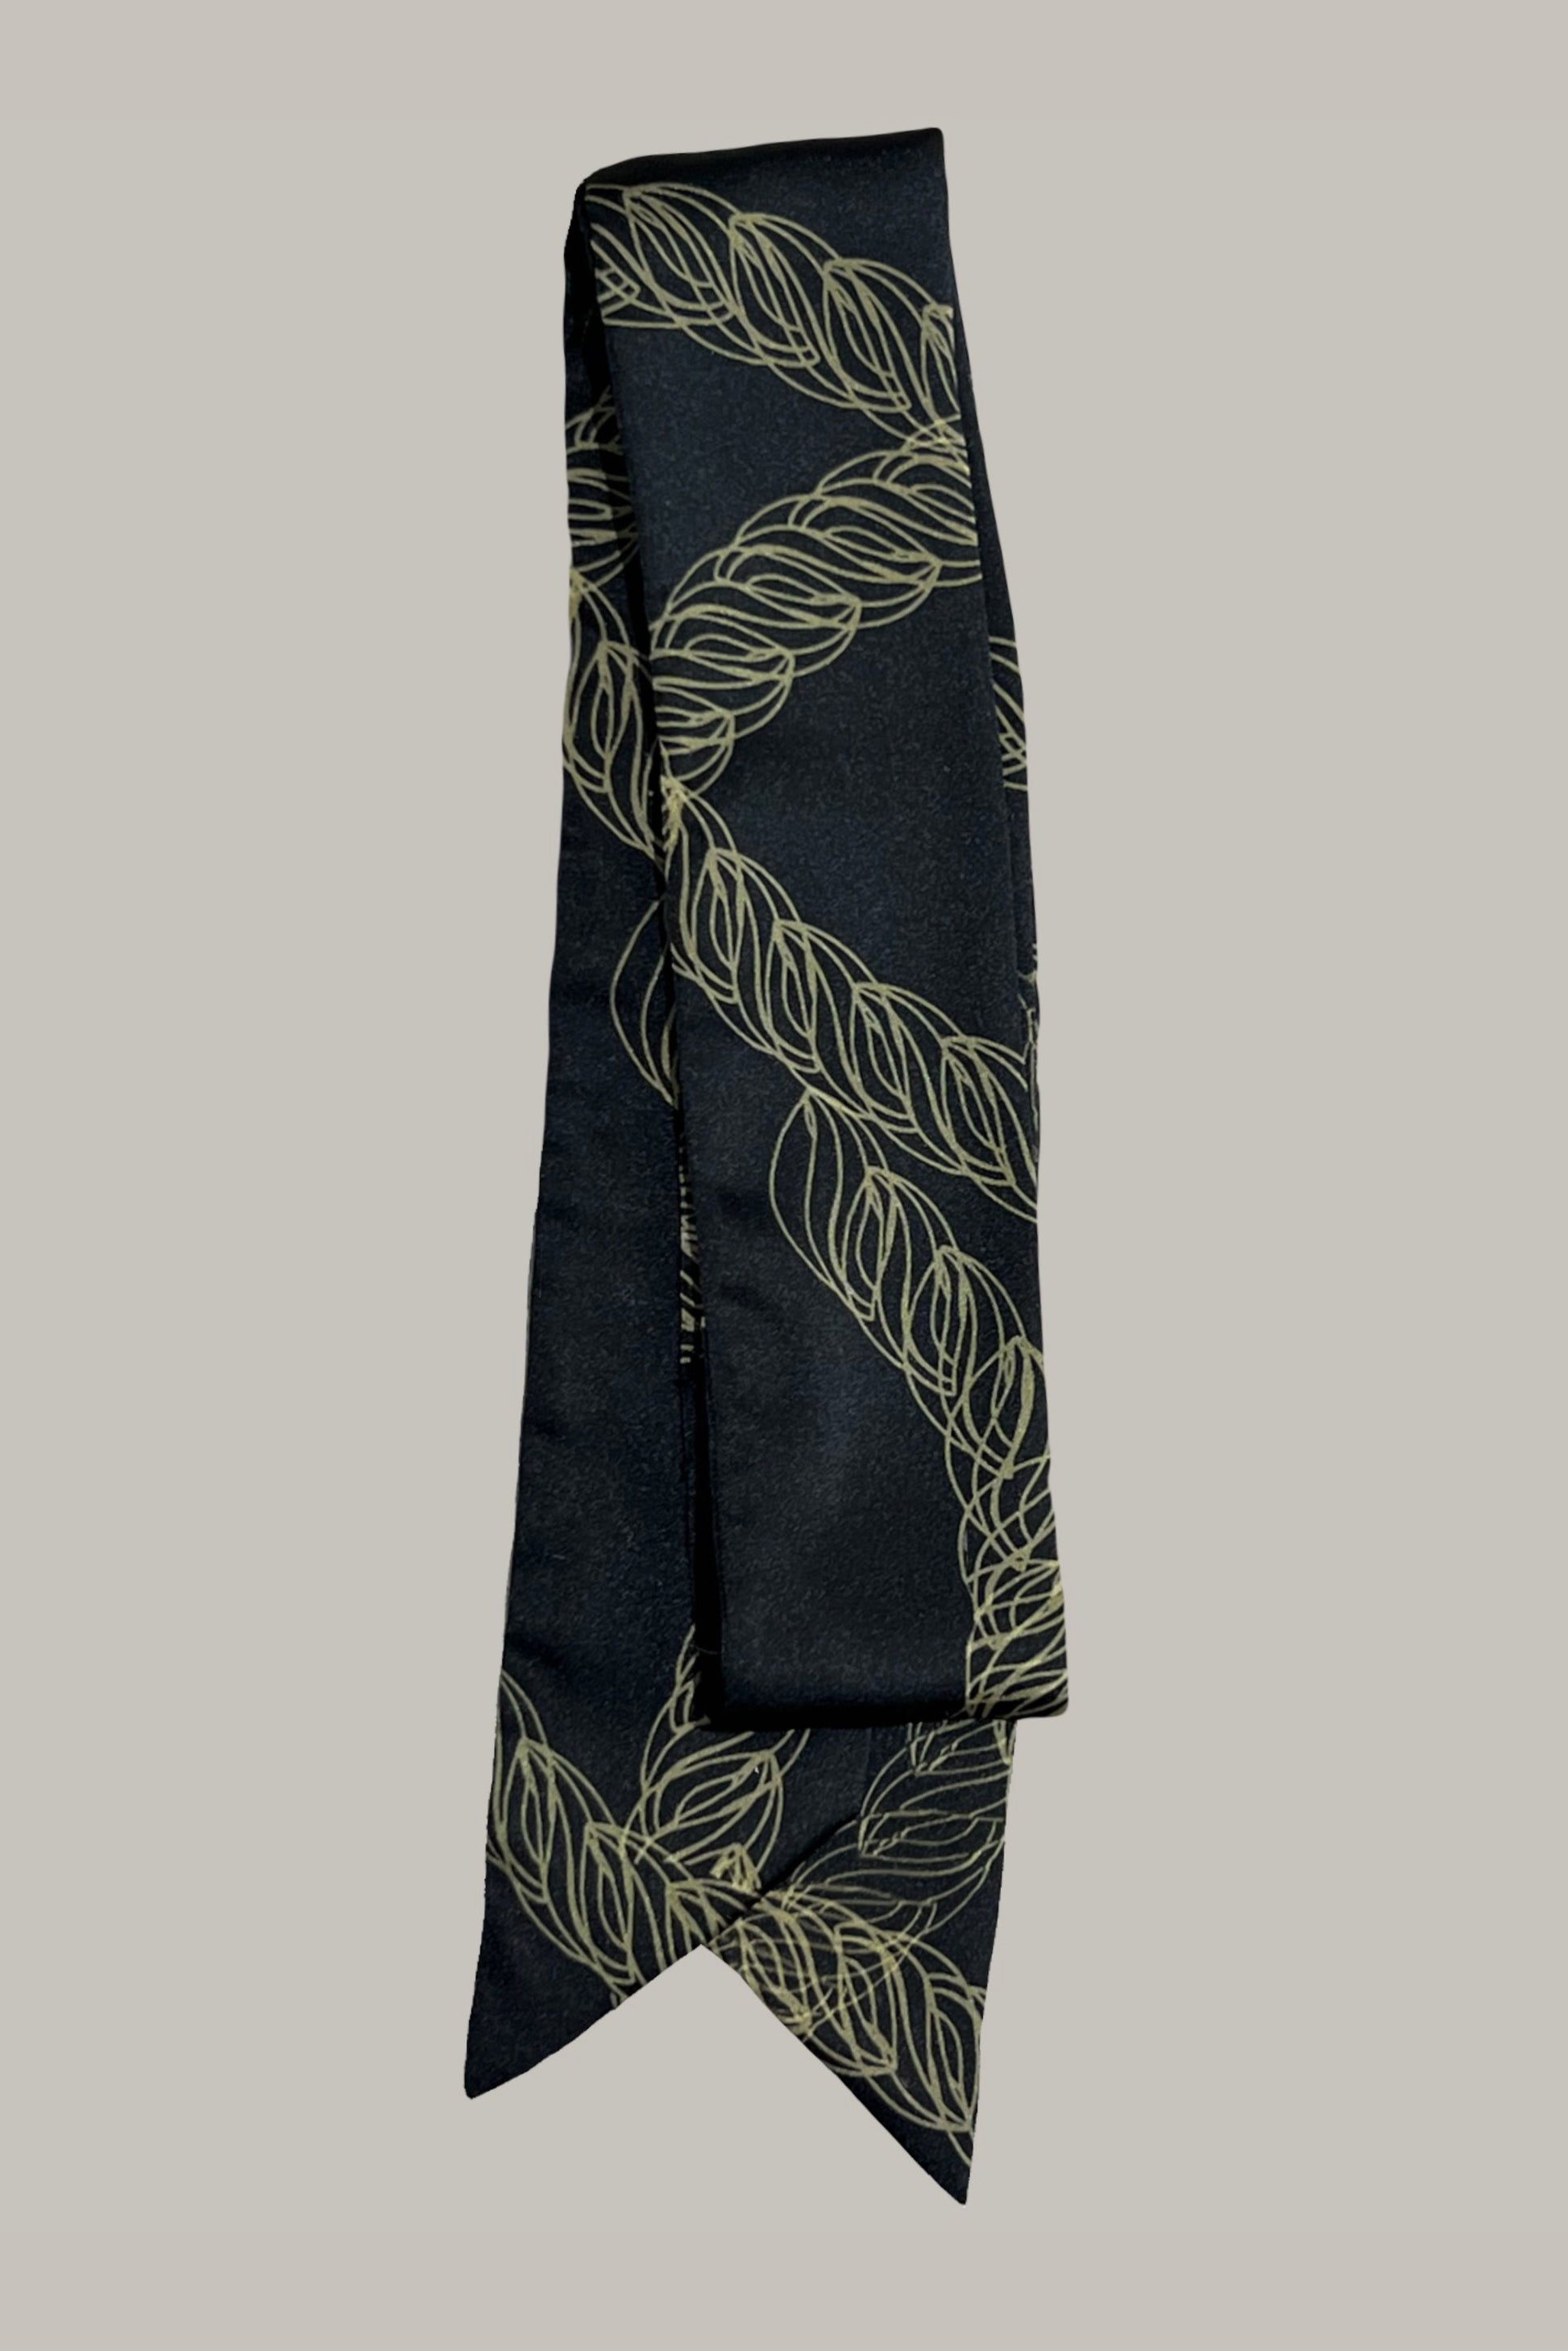 Black and gold chains printed scarf made from an ultra soft recycled poly blend 4